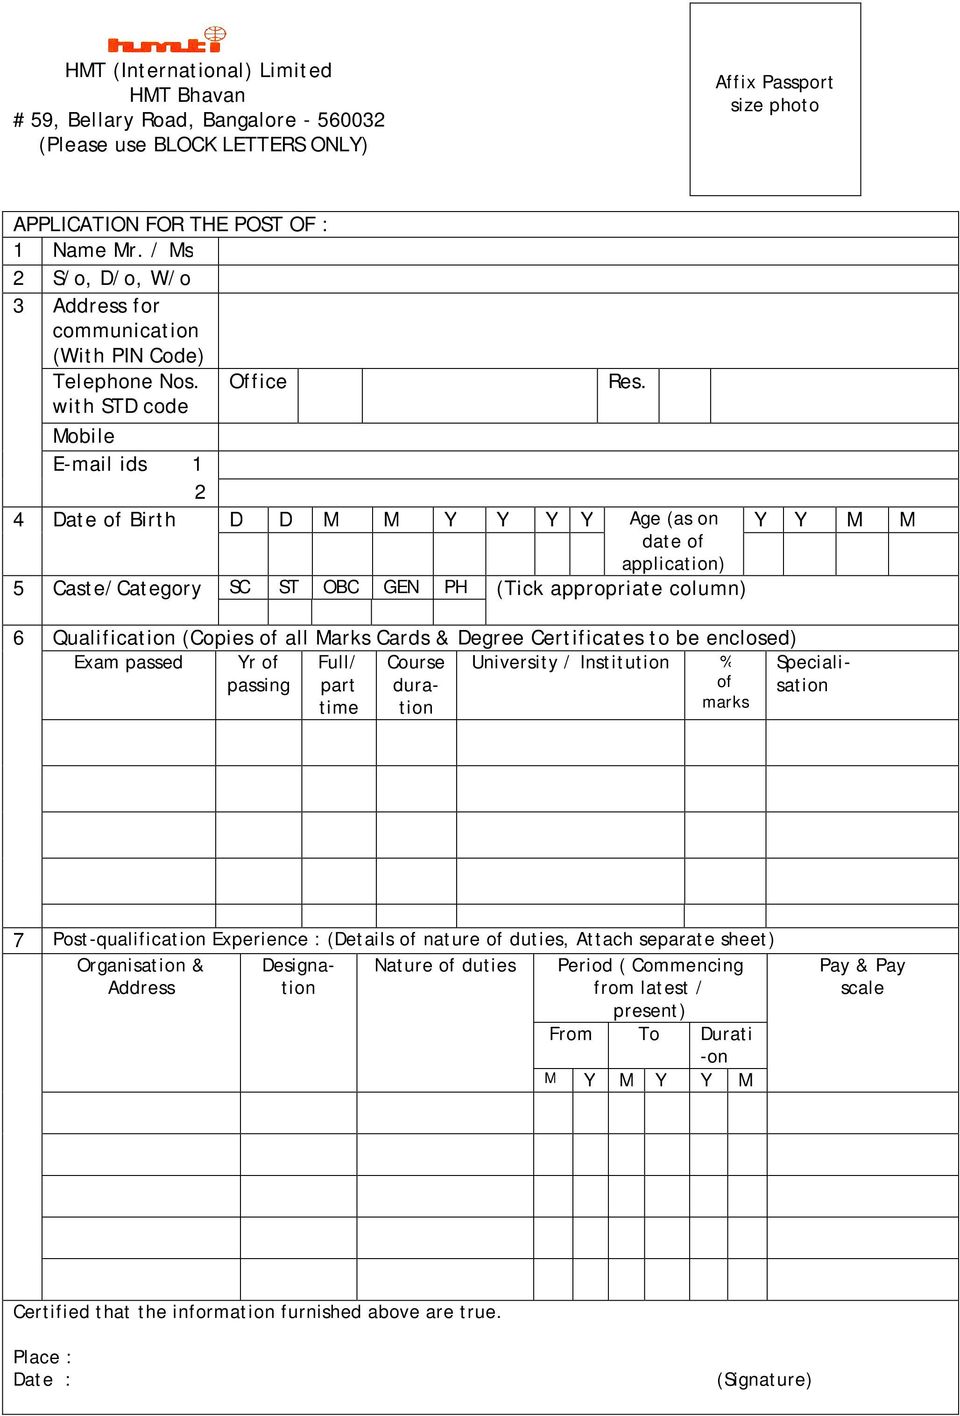 with STD code Mobile E-mail ids 1 2 4 Date of Birth D D M M Y Y Y Y Age (as on date of application) 5 Caste/Category SC ST OBC GEN PH (Tick appropriate column) 6 Qualification (Copies of all Marks